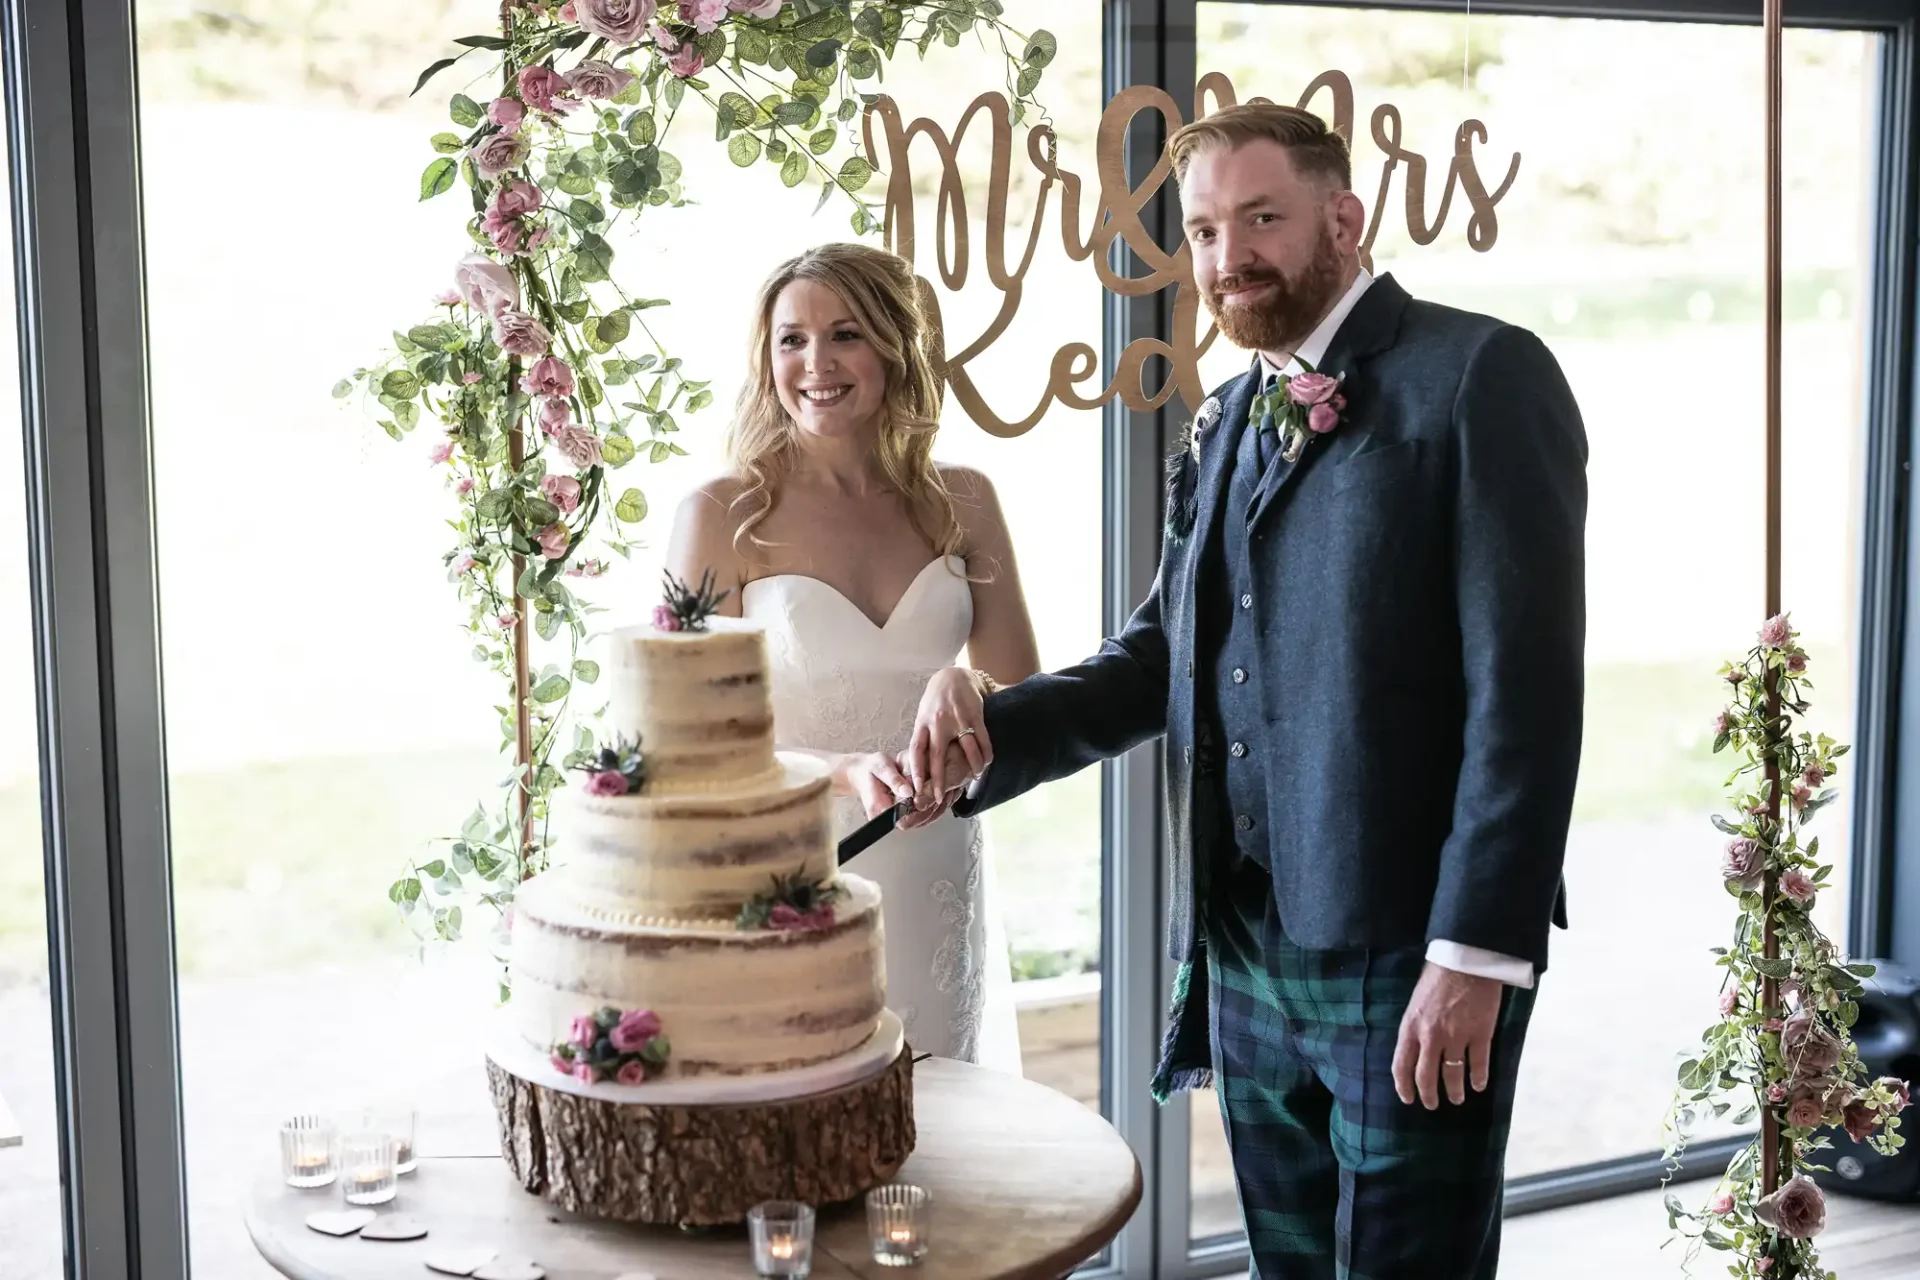 A bride and groom happily cutting a three-tier wedding cake, standing by a floral archway with a "mr & mrs" sign above.